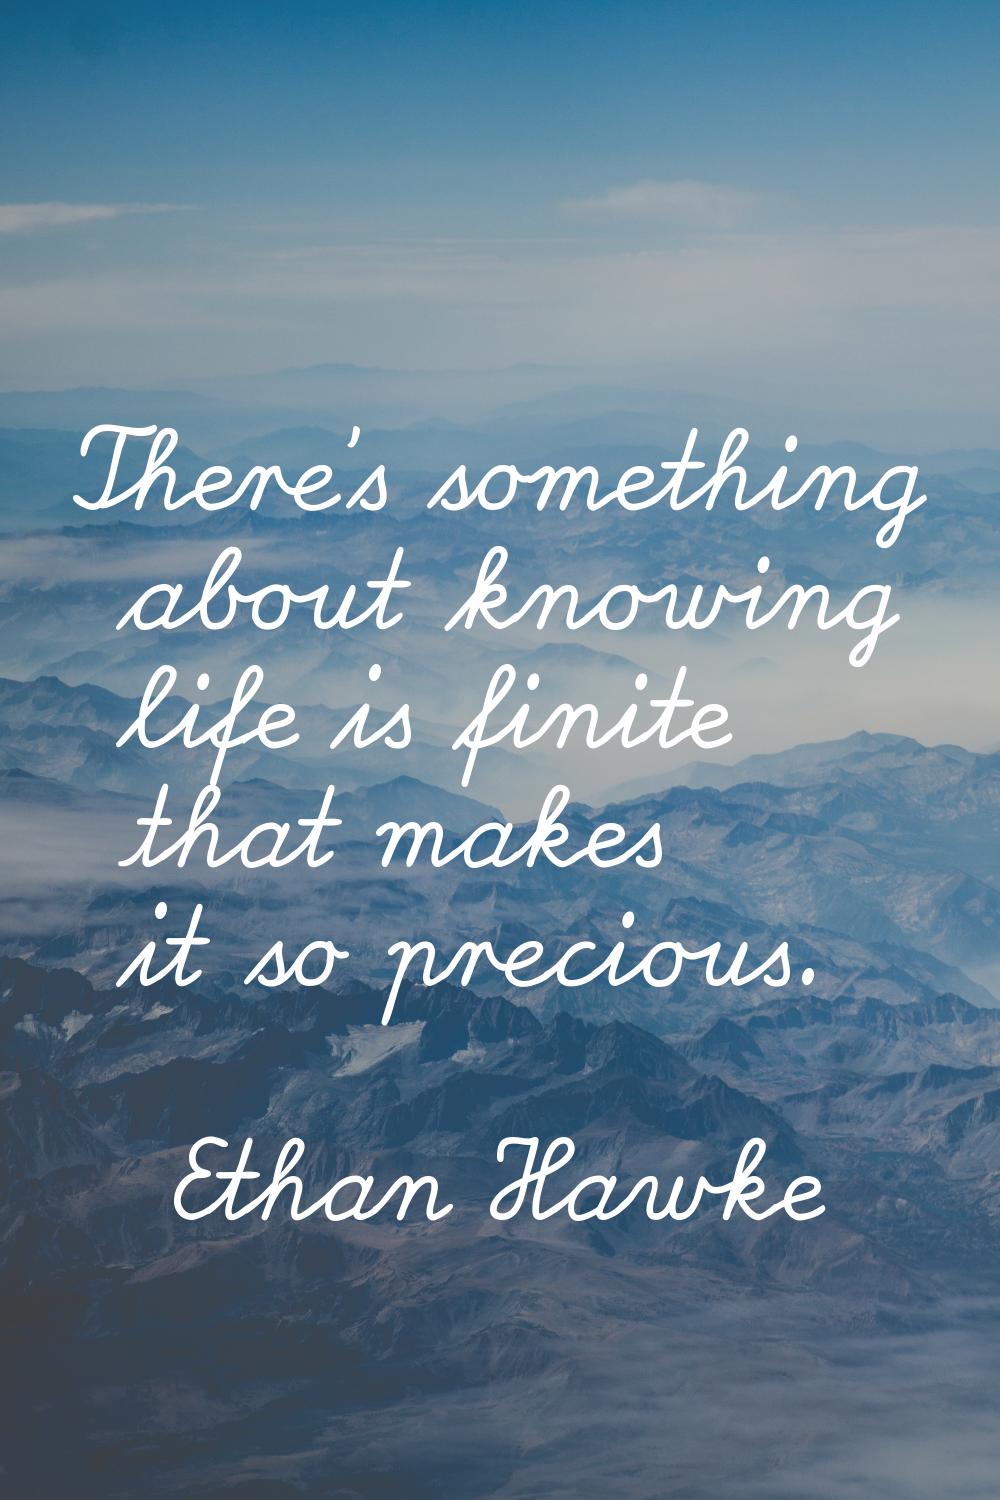 There's something about knowing life is finite that makes it so precious.